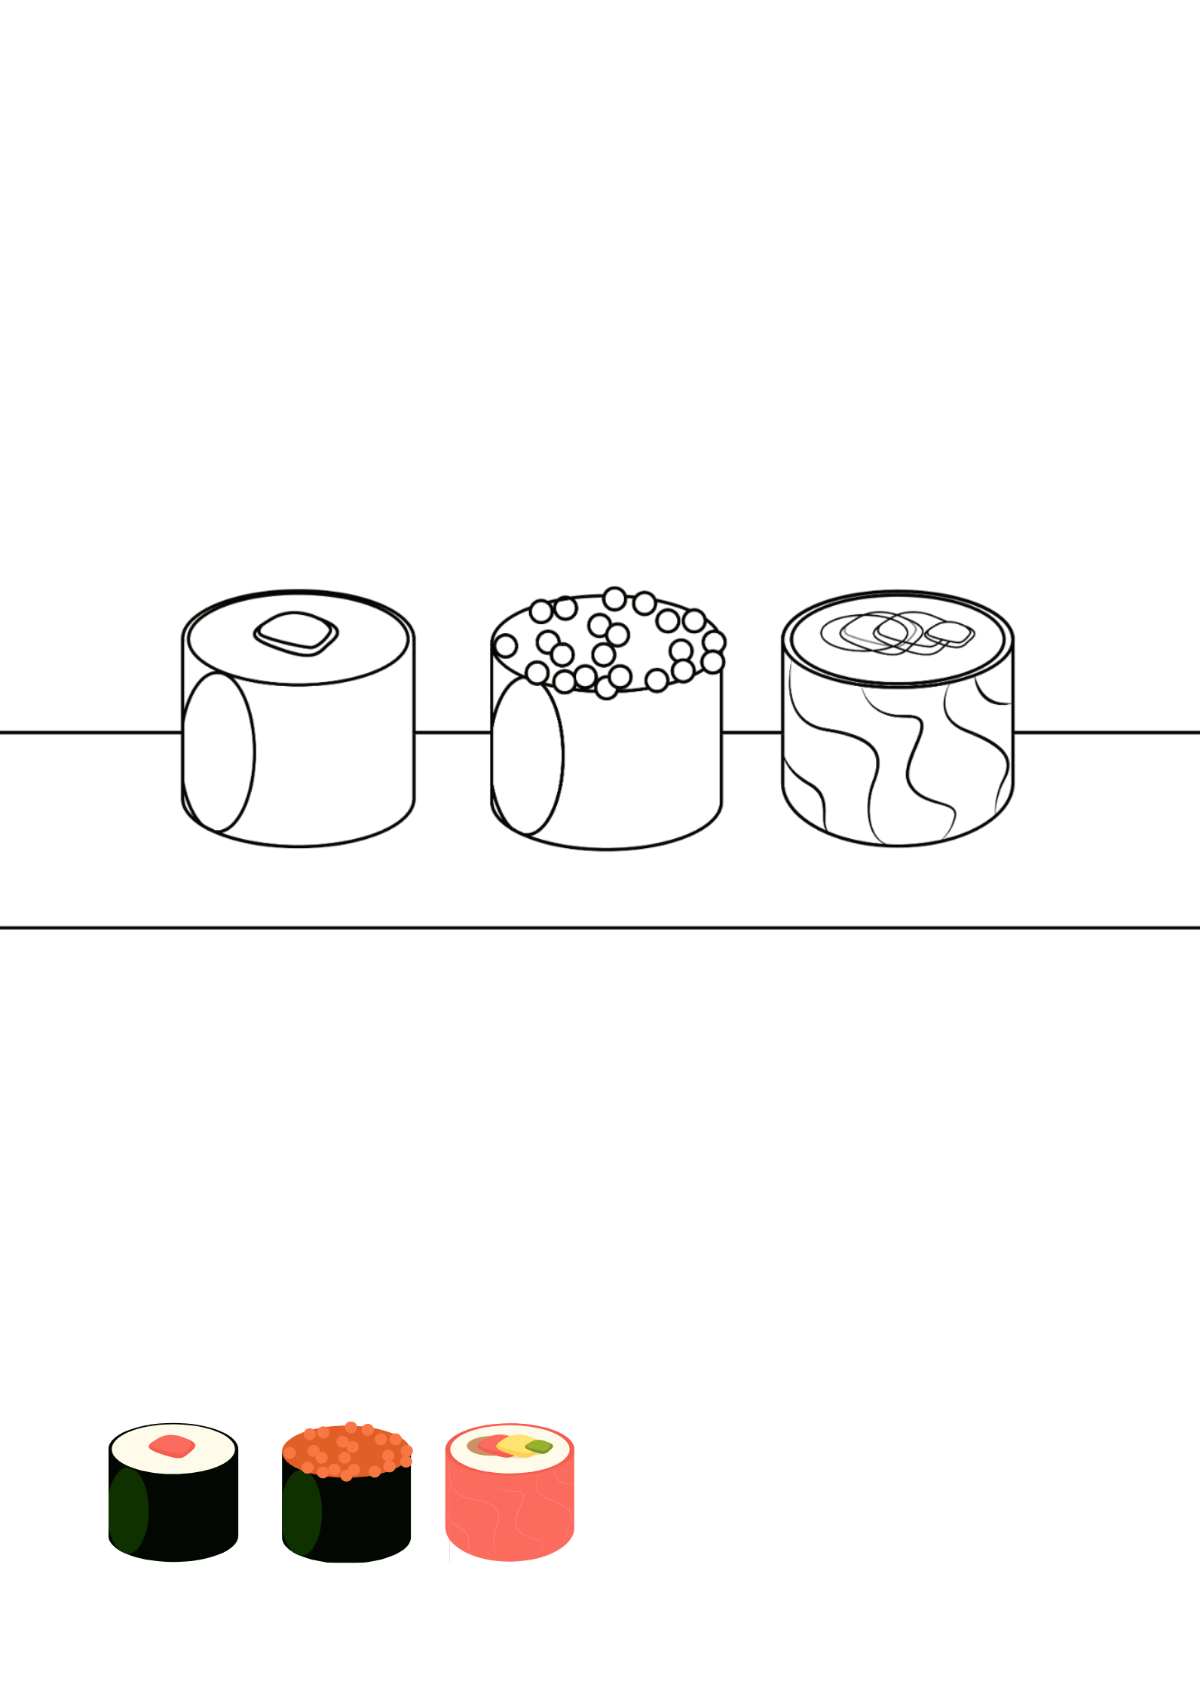 Japanese Food Coloring Page Template